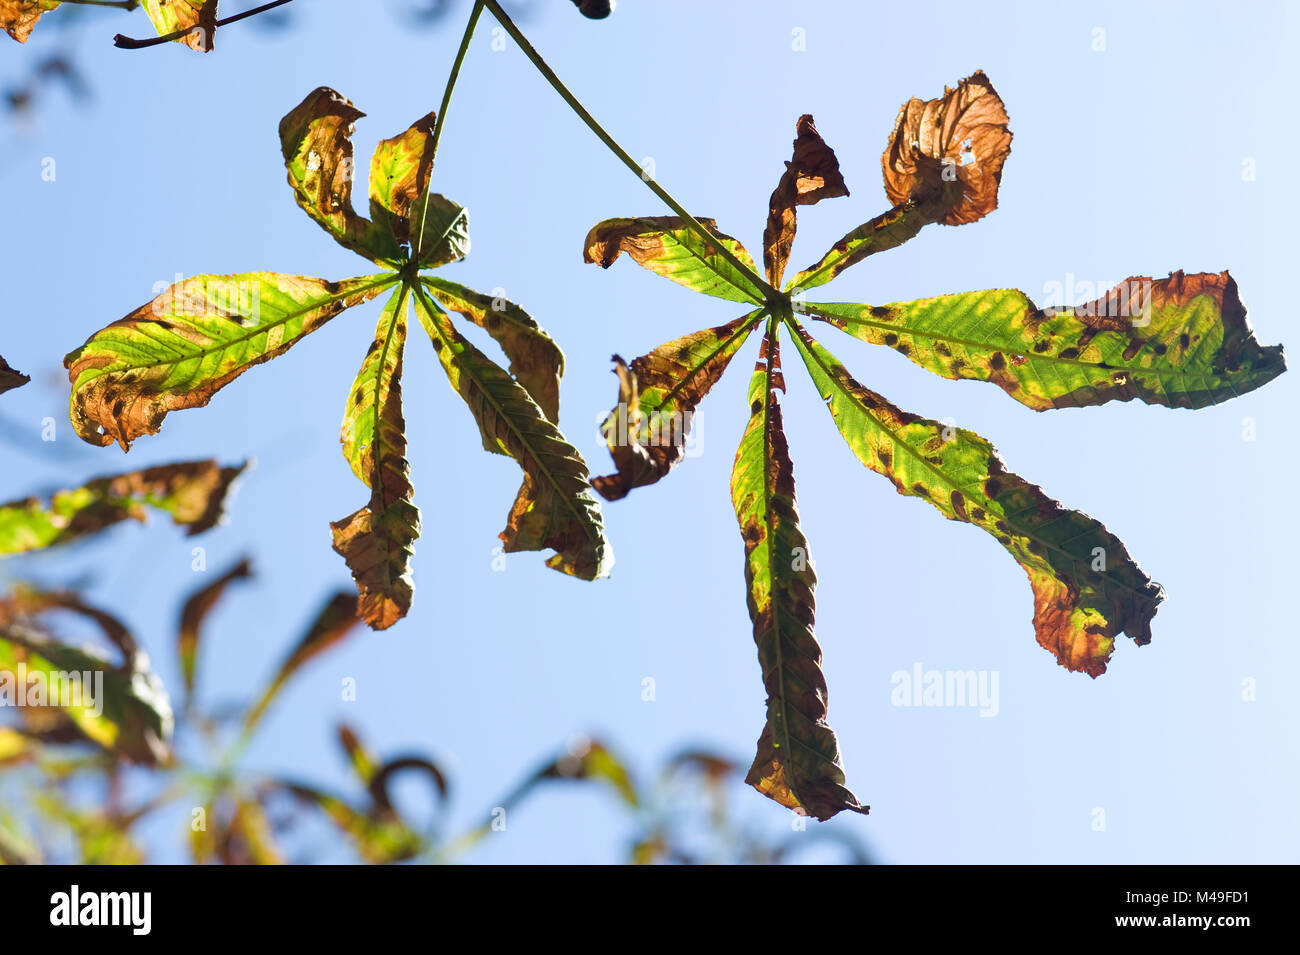 Diseased horse chestnut leaves in autumn, damaged by horse chestnut leaf miner insect pest, Cameraria ohridella Stock Photo